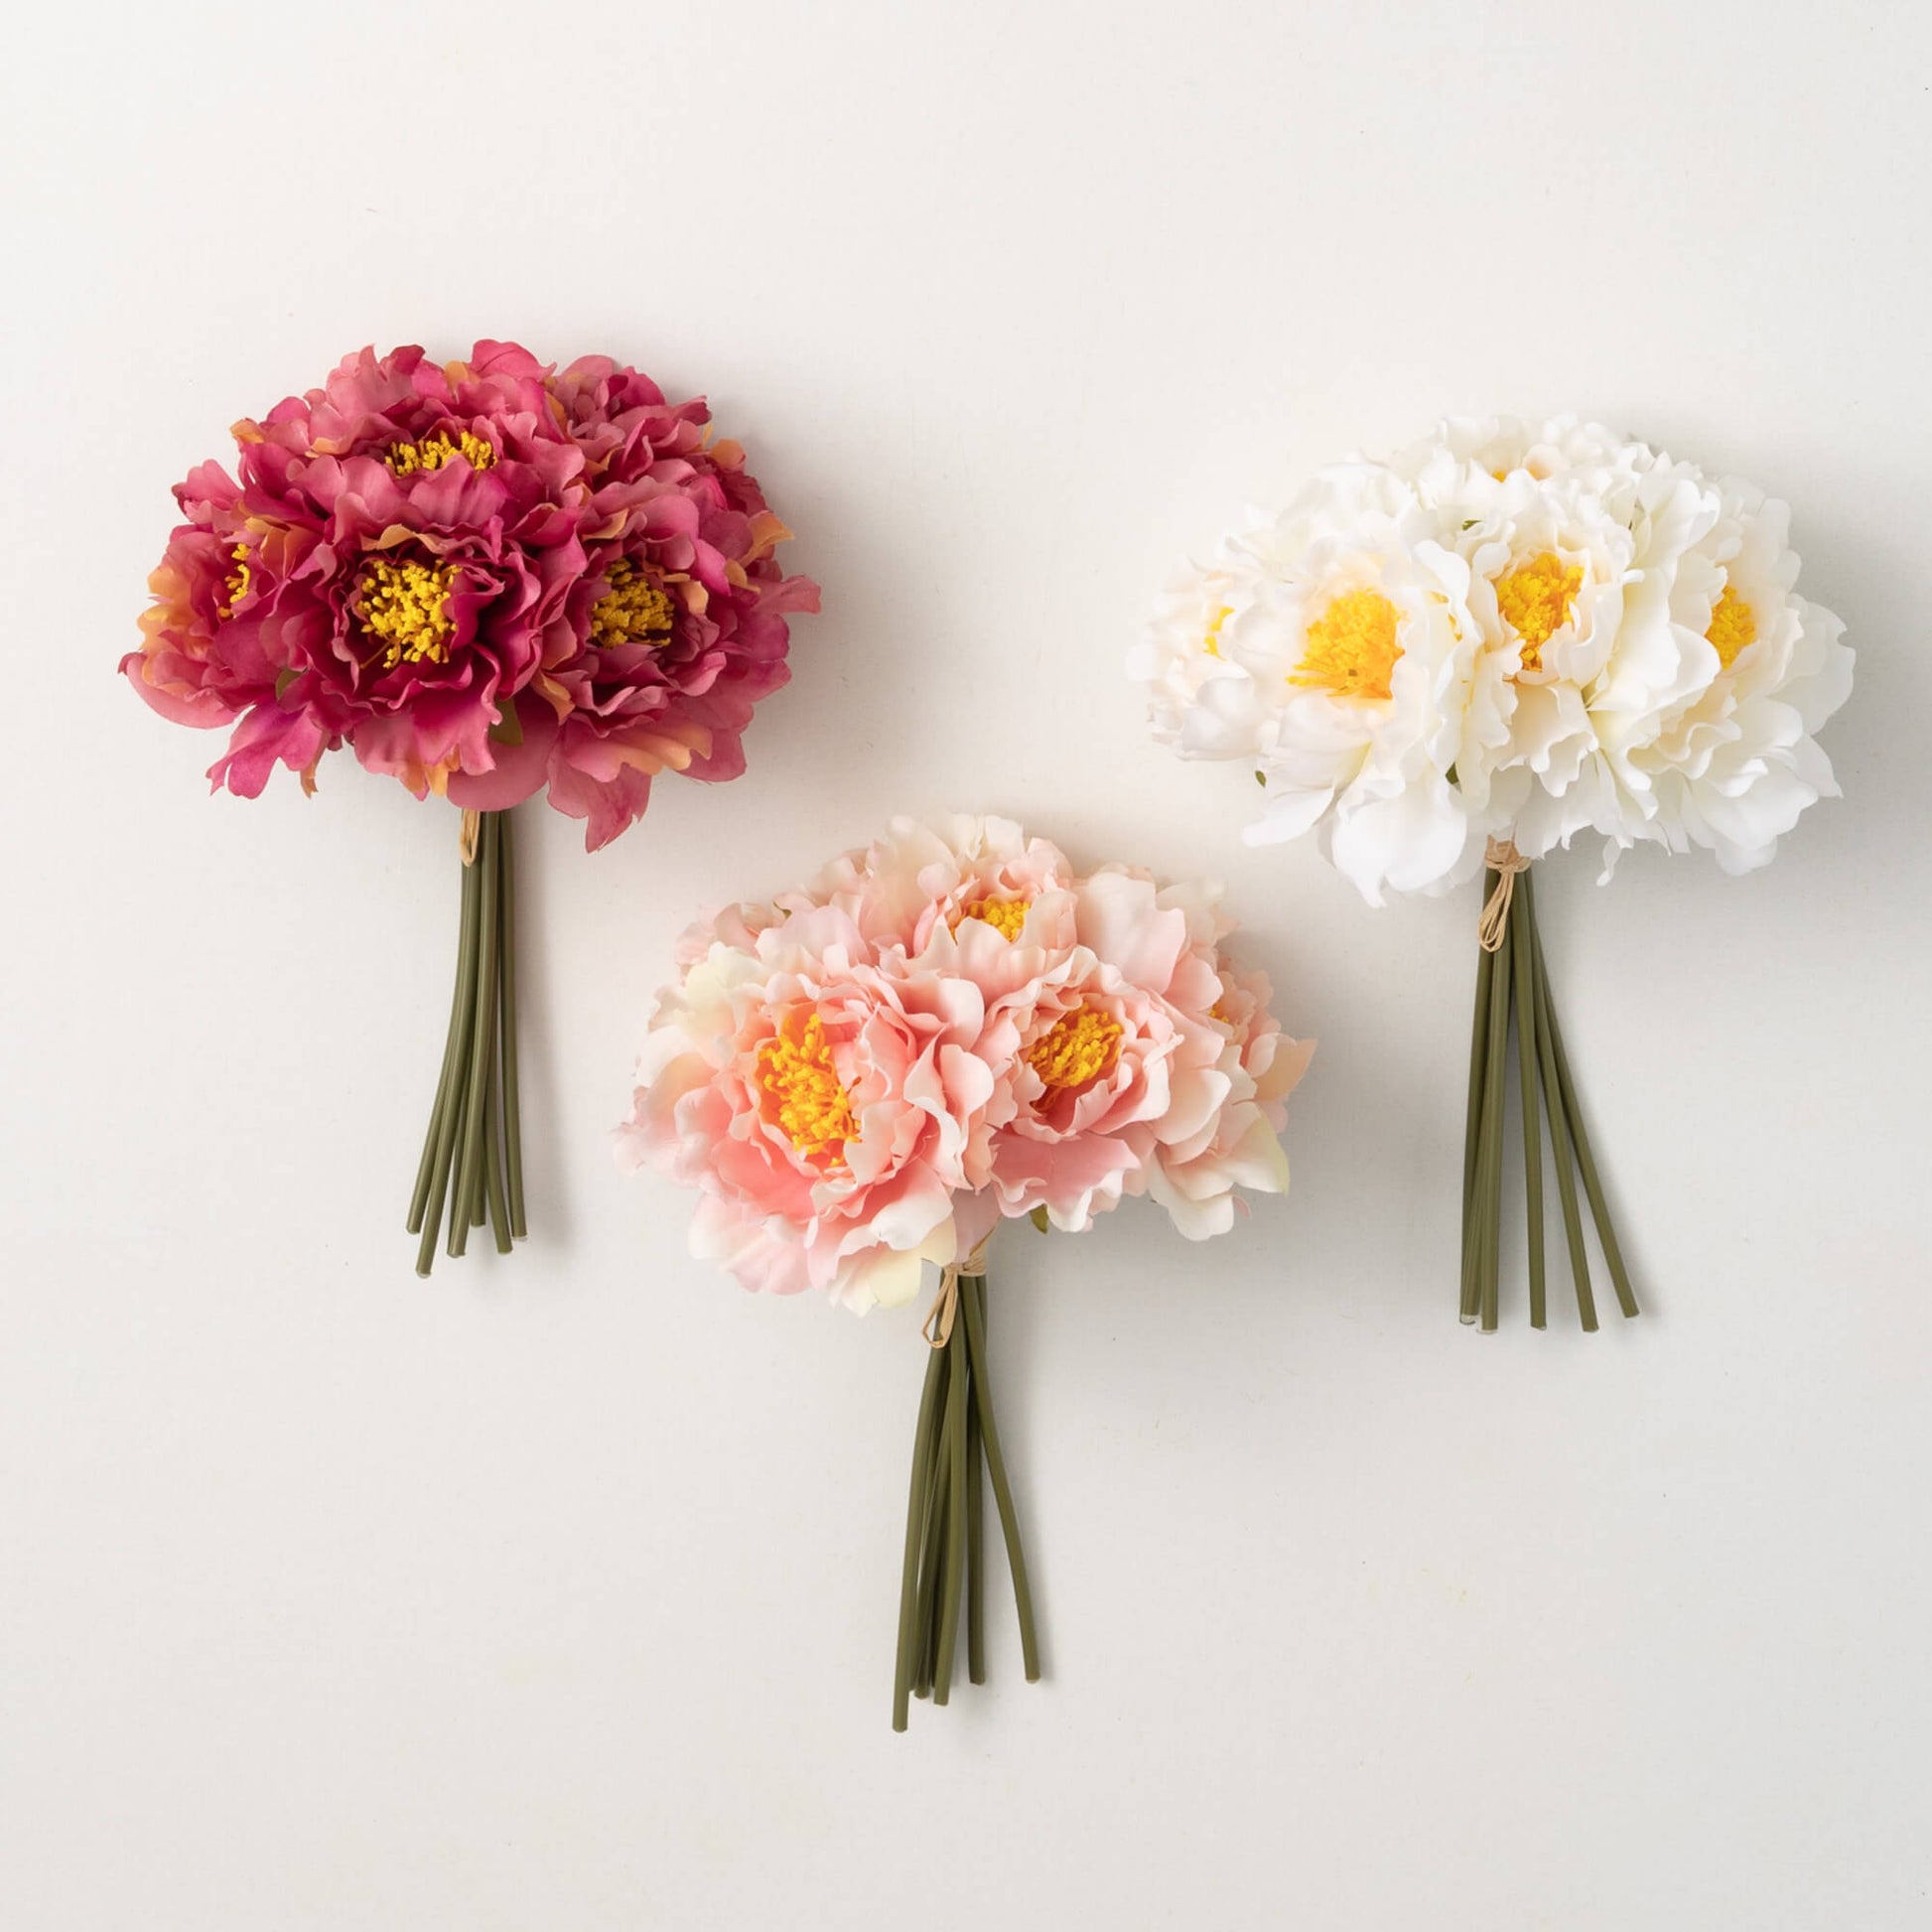 3 bundles of artificial flowers in various shades of pinks.